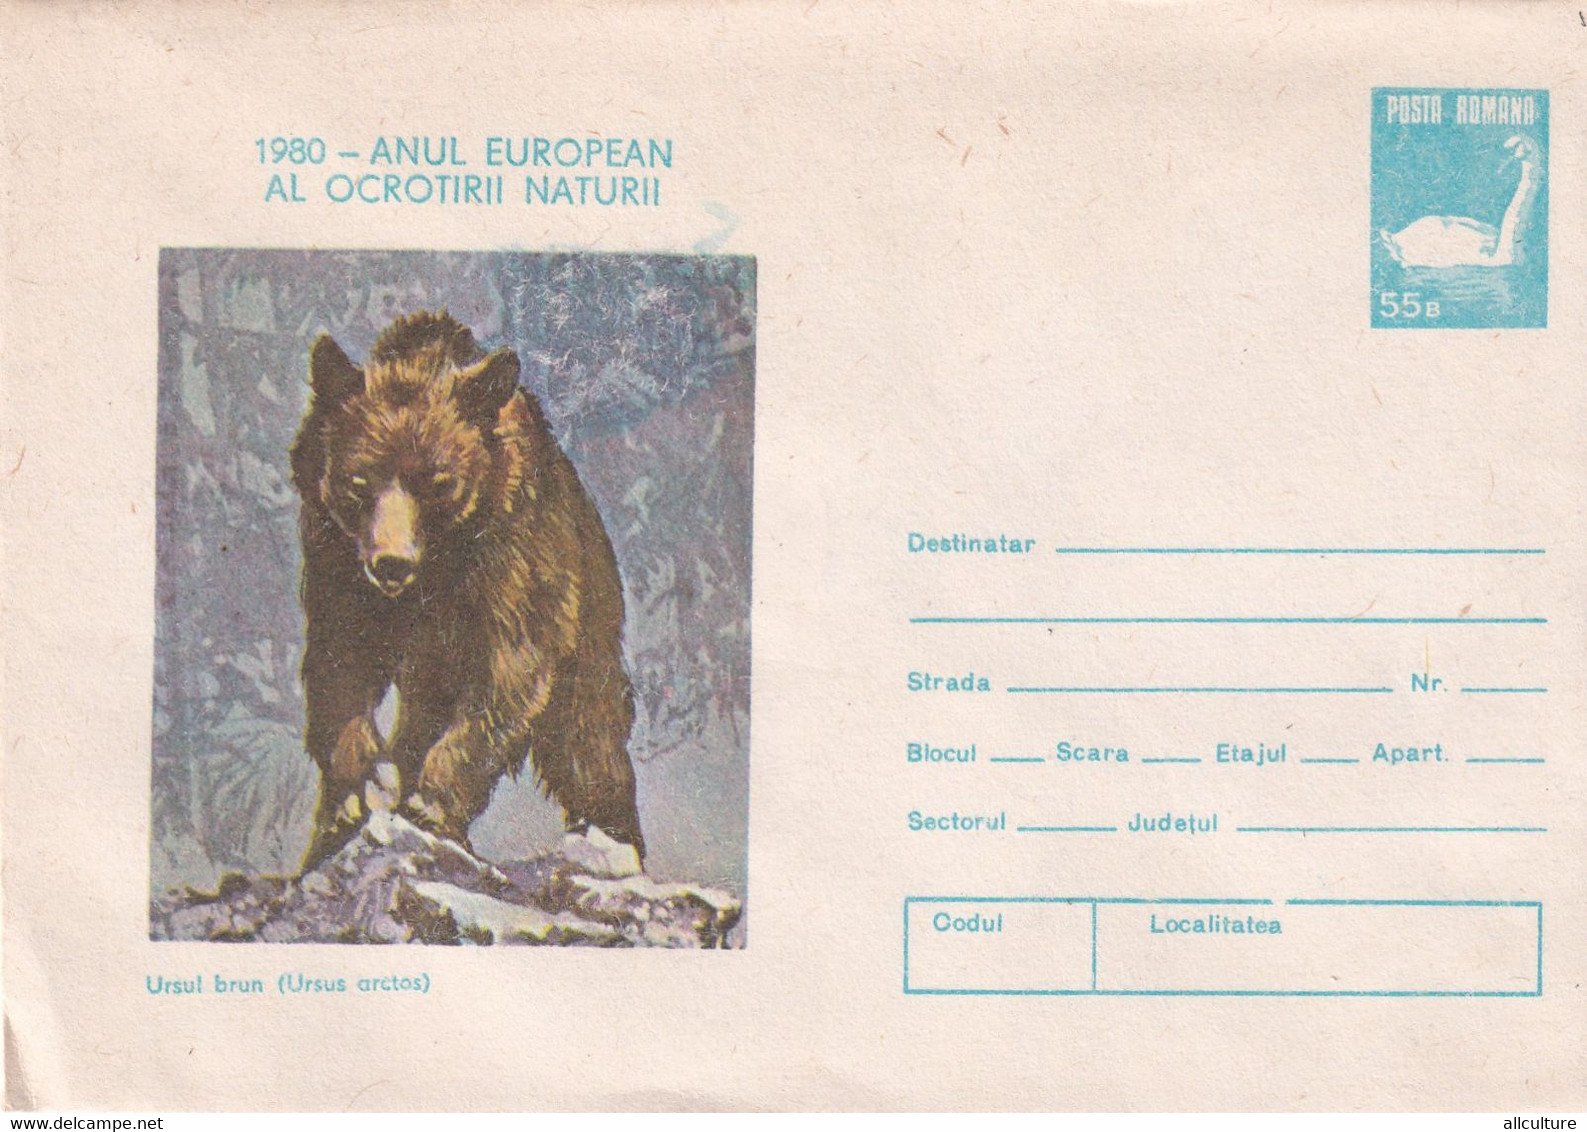 A3139 - The Brown Bear (ursus Arctos) European Year Of Nature Protection 1980 Romania Posta Romana Cover Stationery - Ours